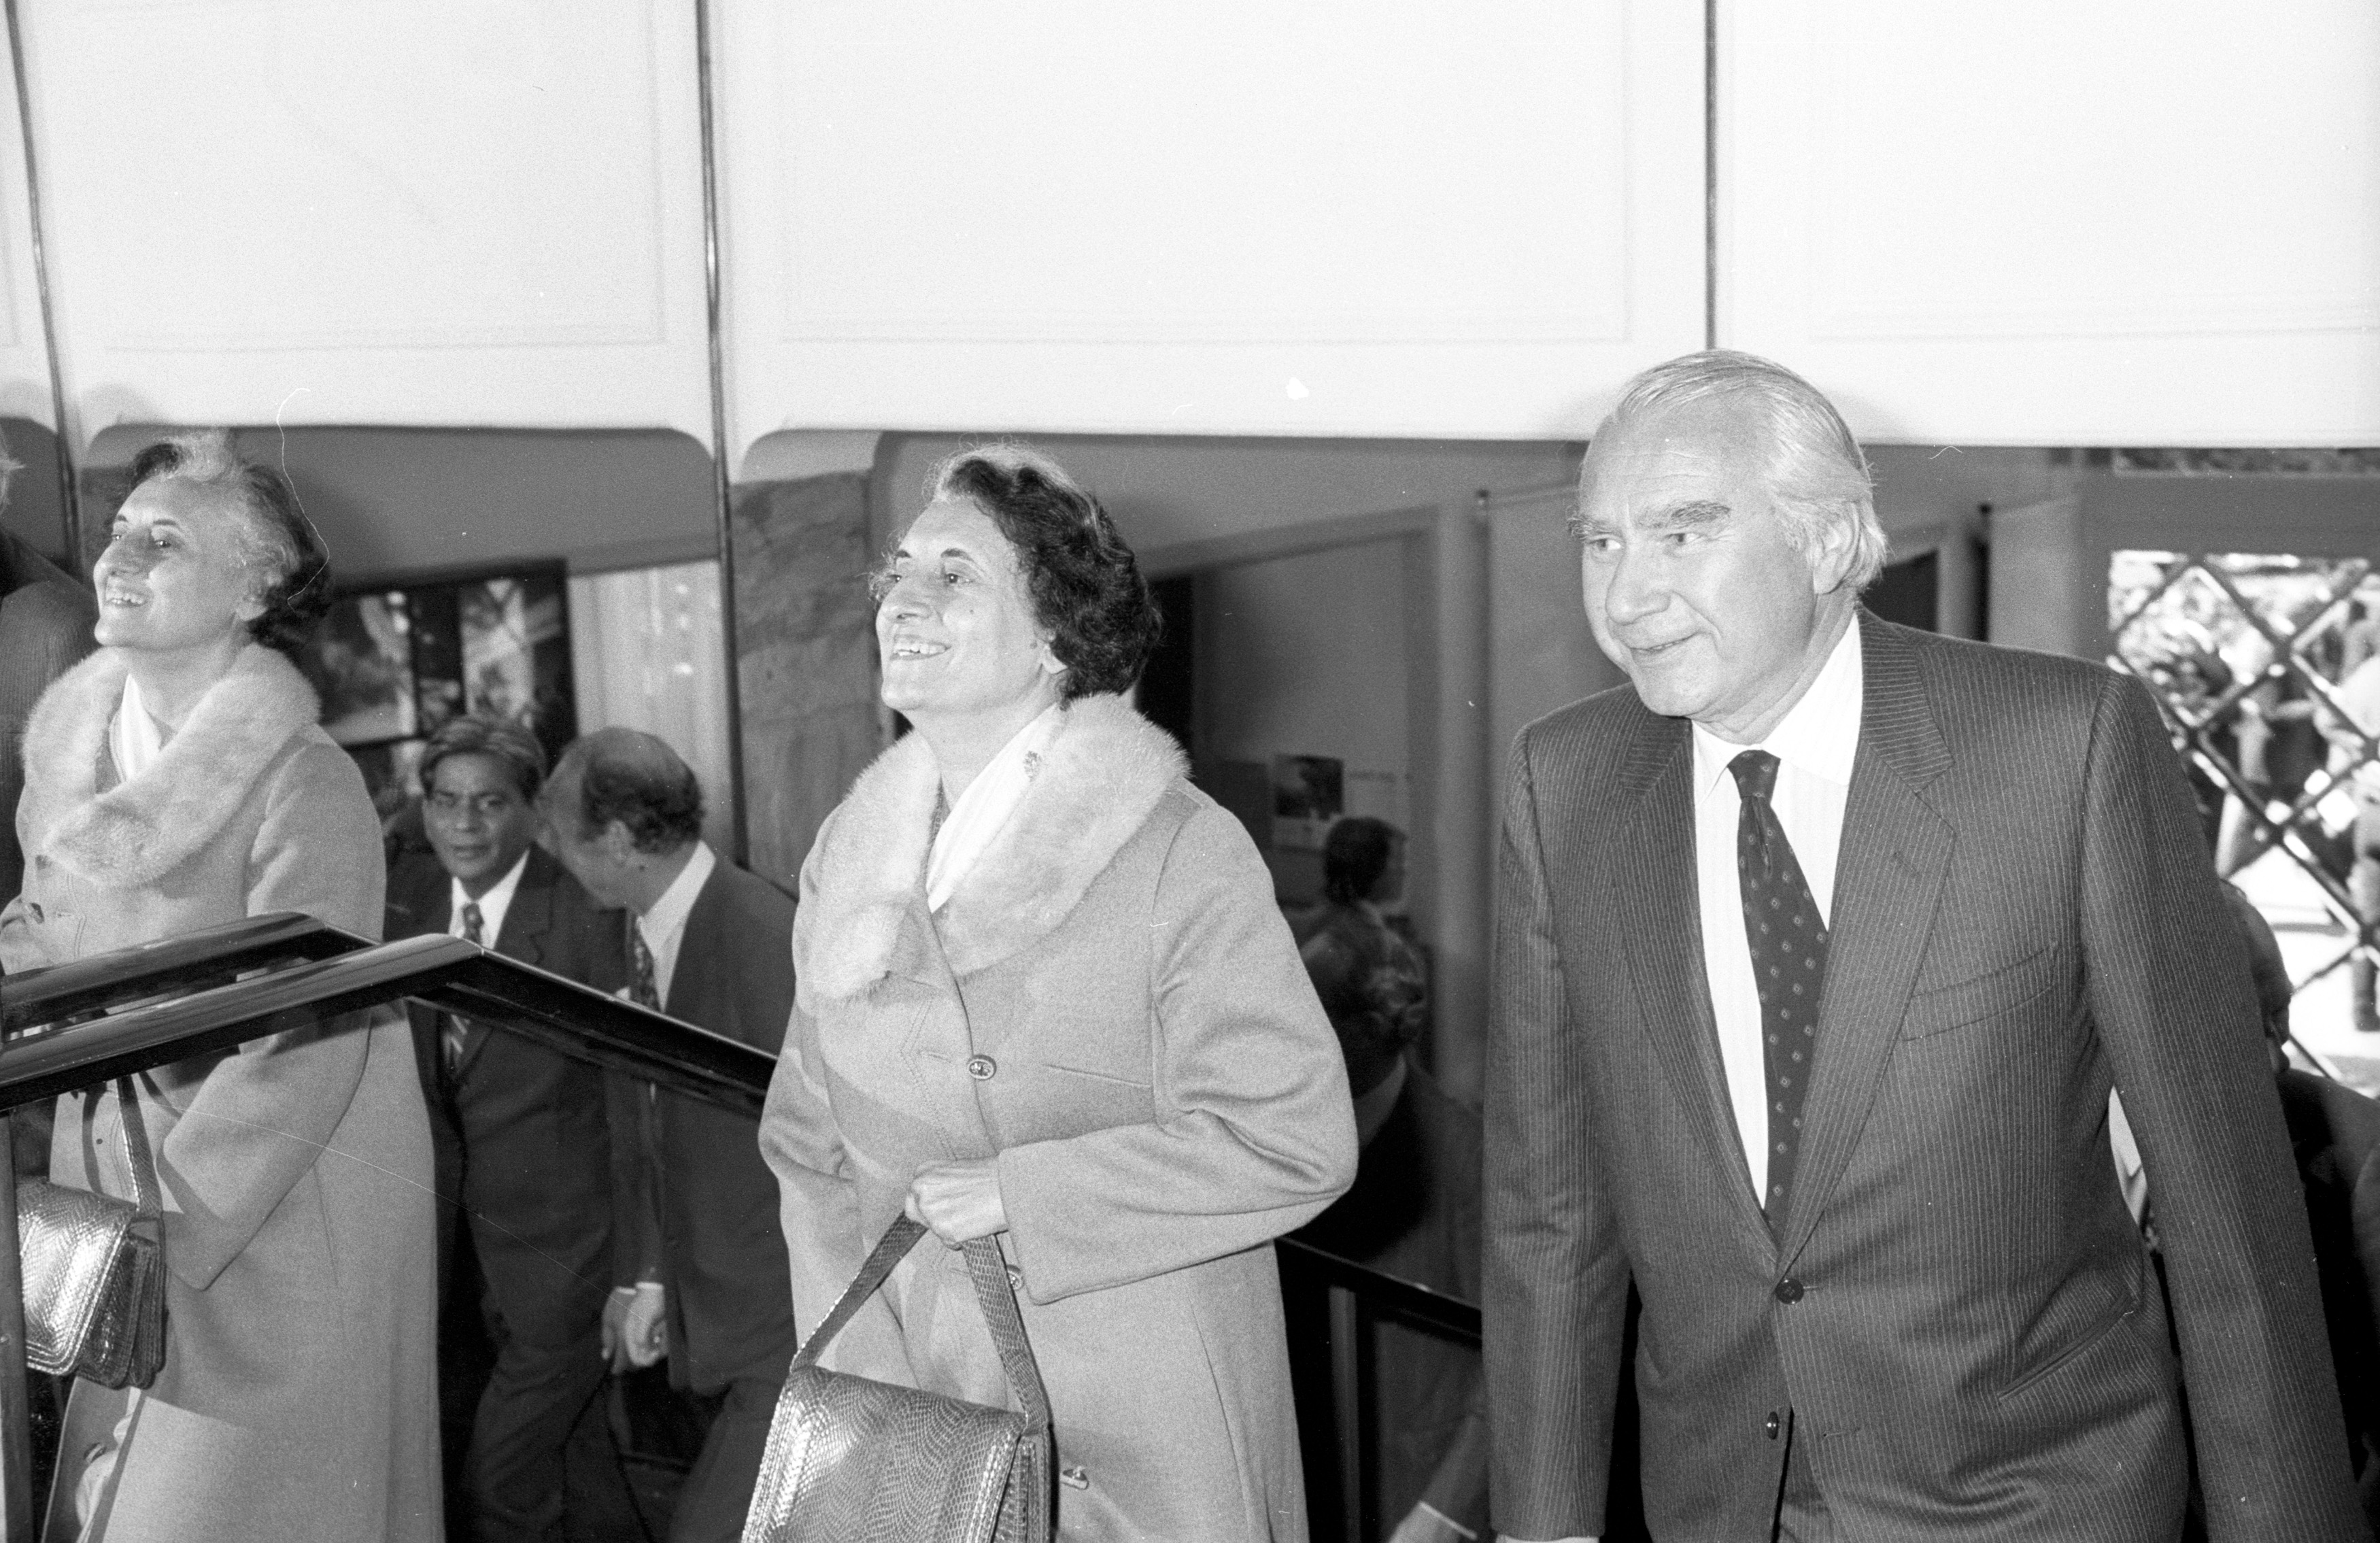 Indira Gandhi, Prime Minister of India, with the President of the ICRC, Alexandre Hay, on 6 May 1981